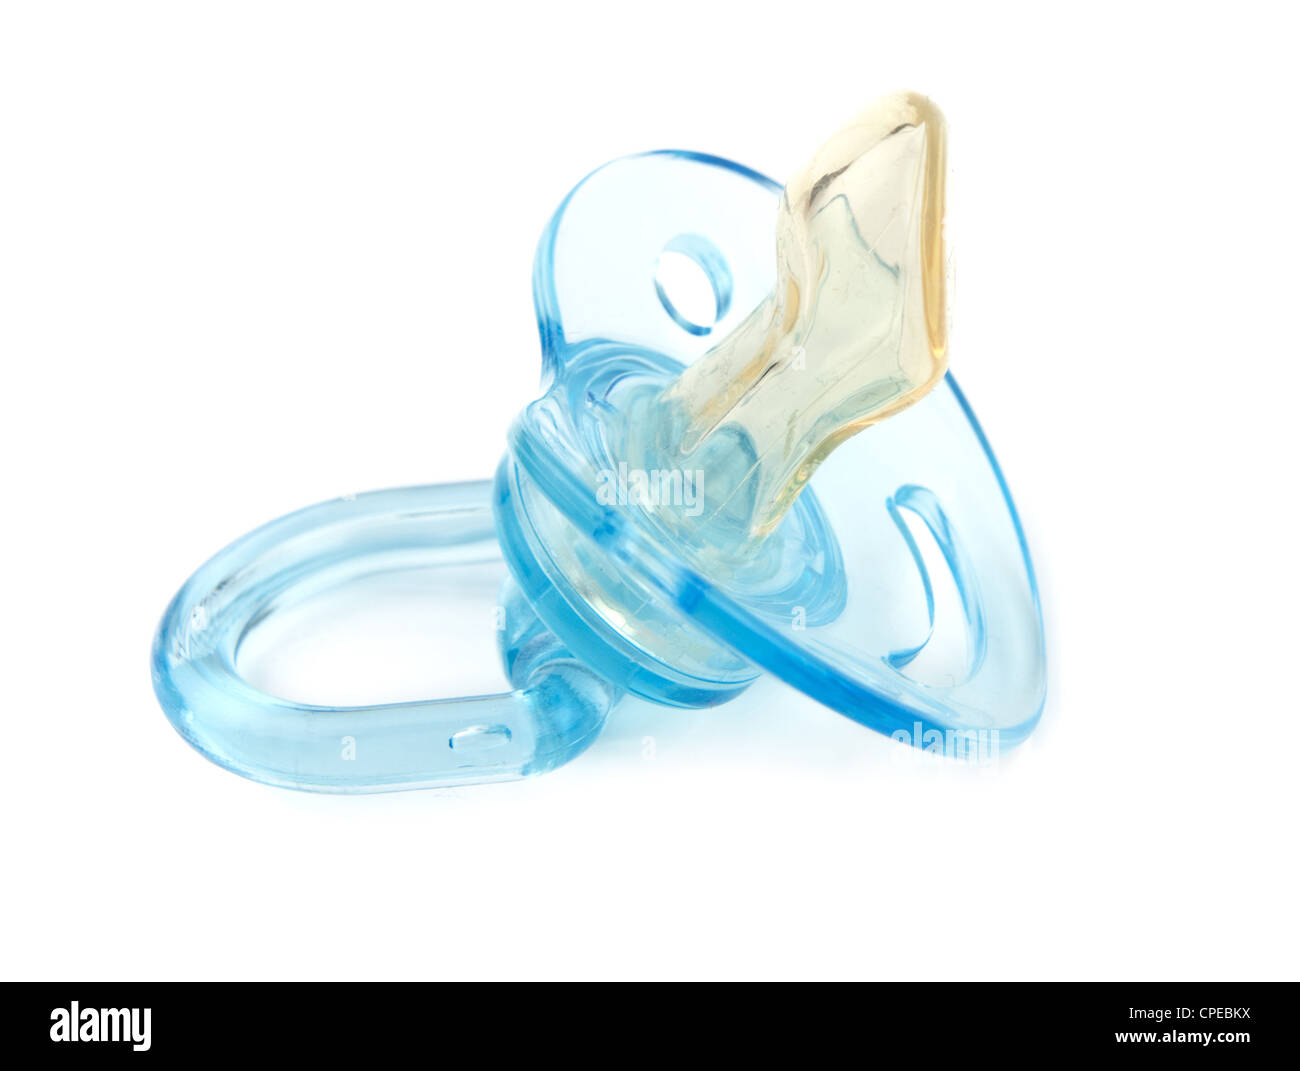 blue pacifier is isolated on white Stock Photo